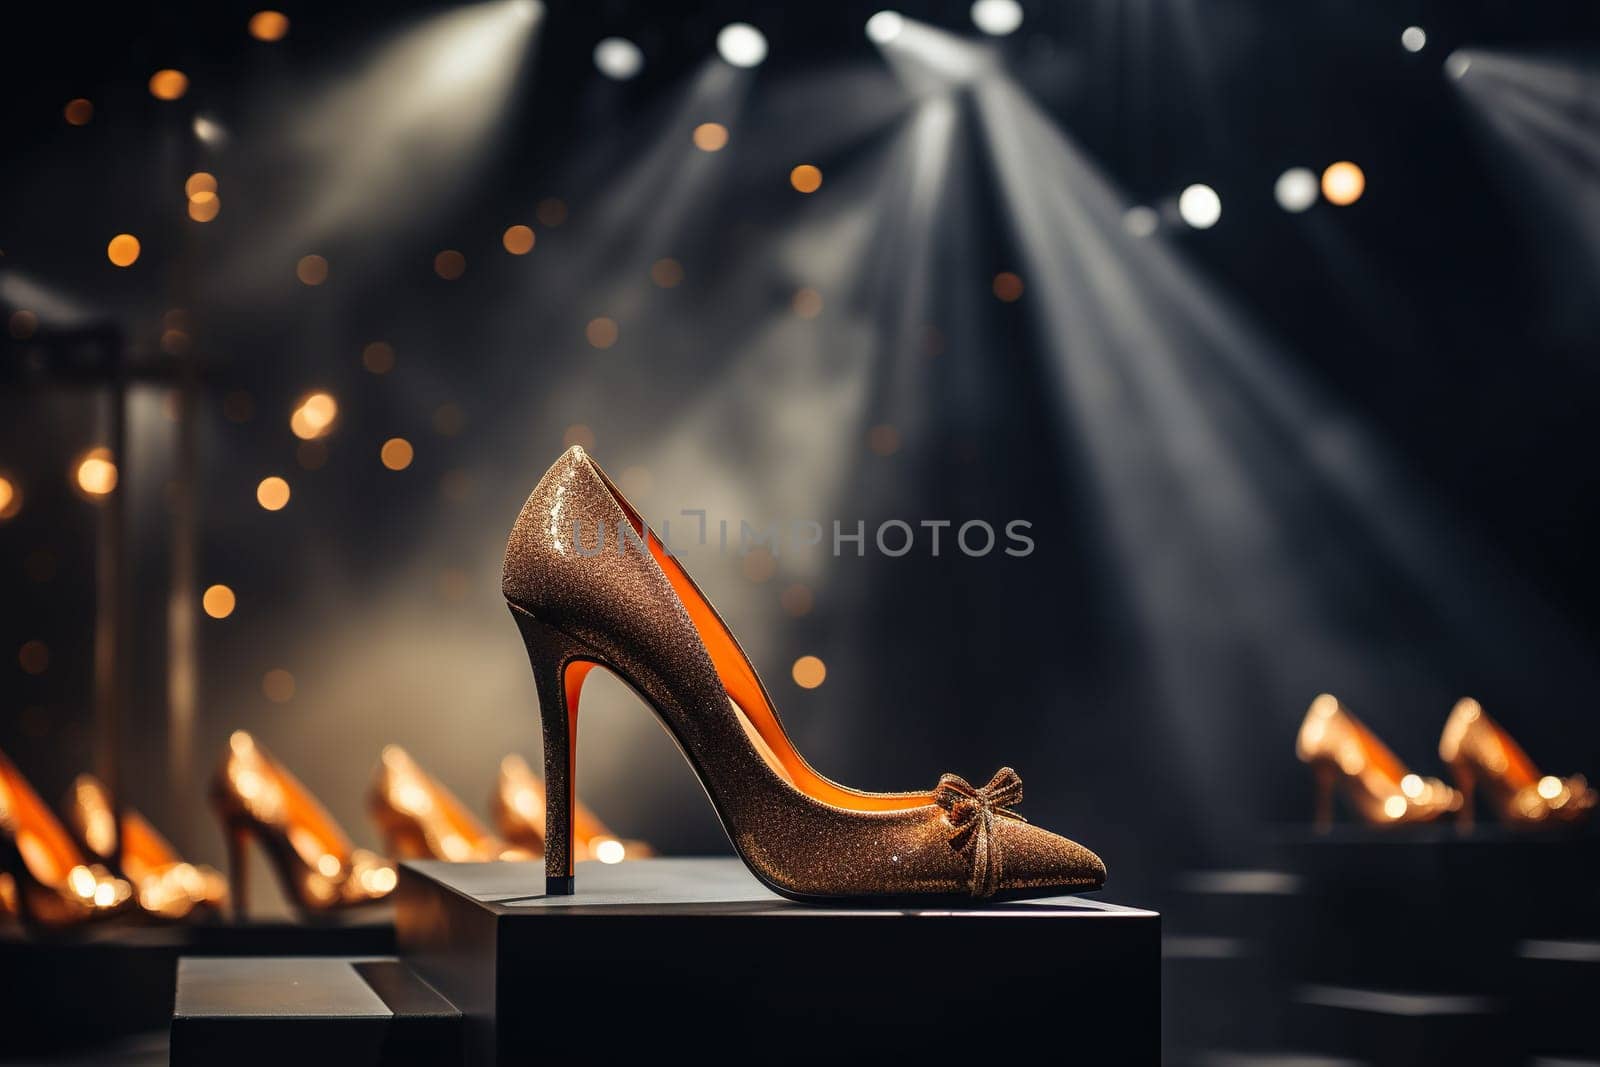 Beautiful elegant shiny women's high-heeled shoes standing on a mirrored podium in the rays of spotlights. Fashion show. Festive women's shoes. Side view. Generated by artificial intelligence